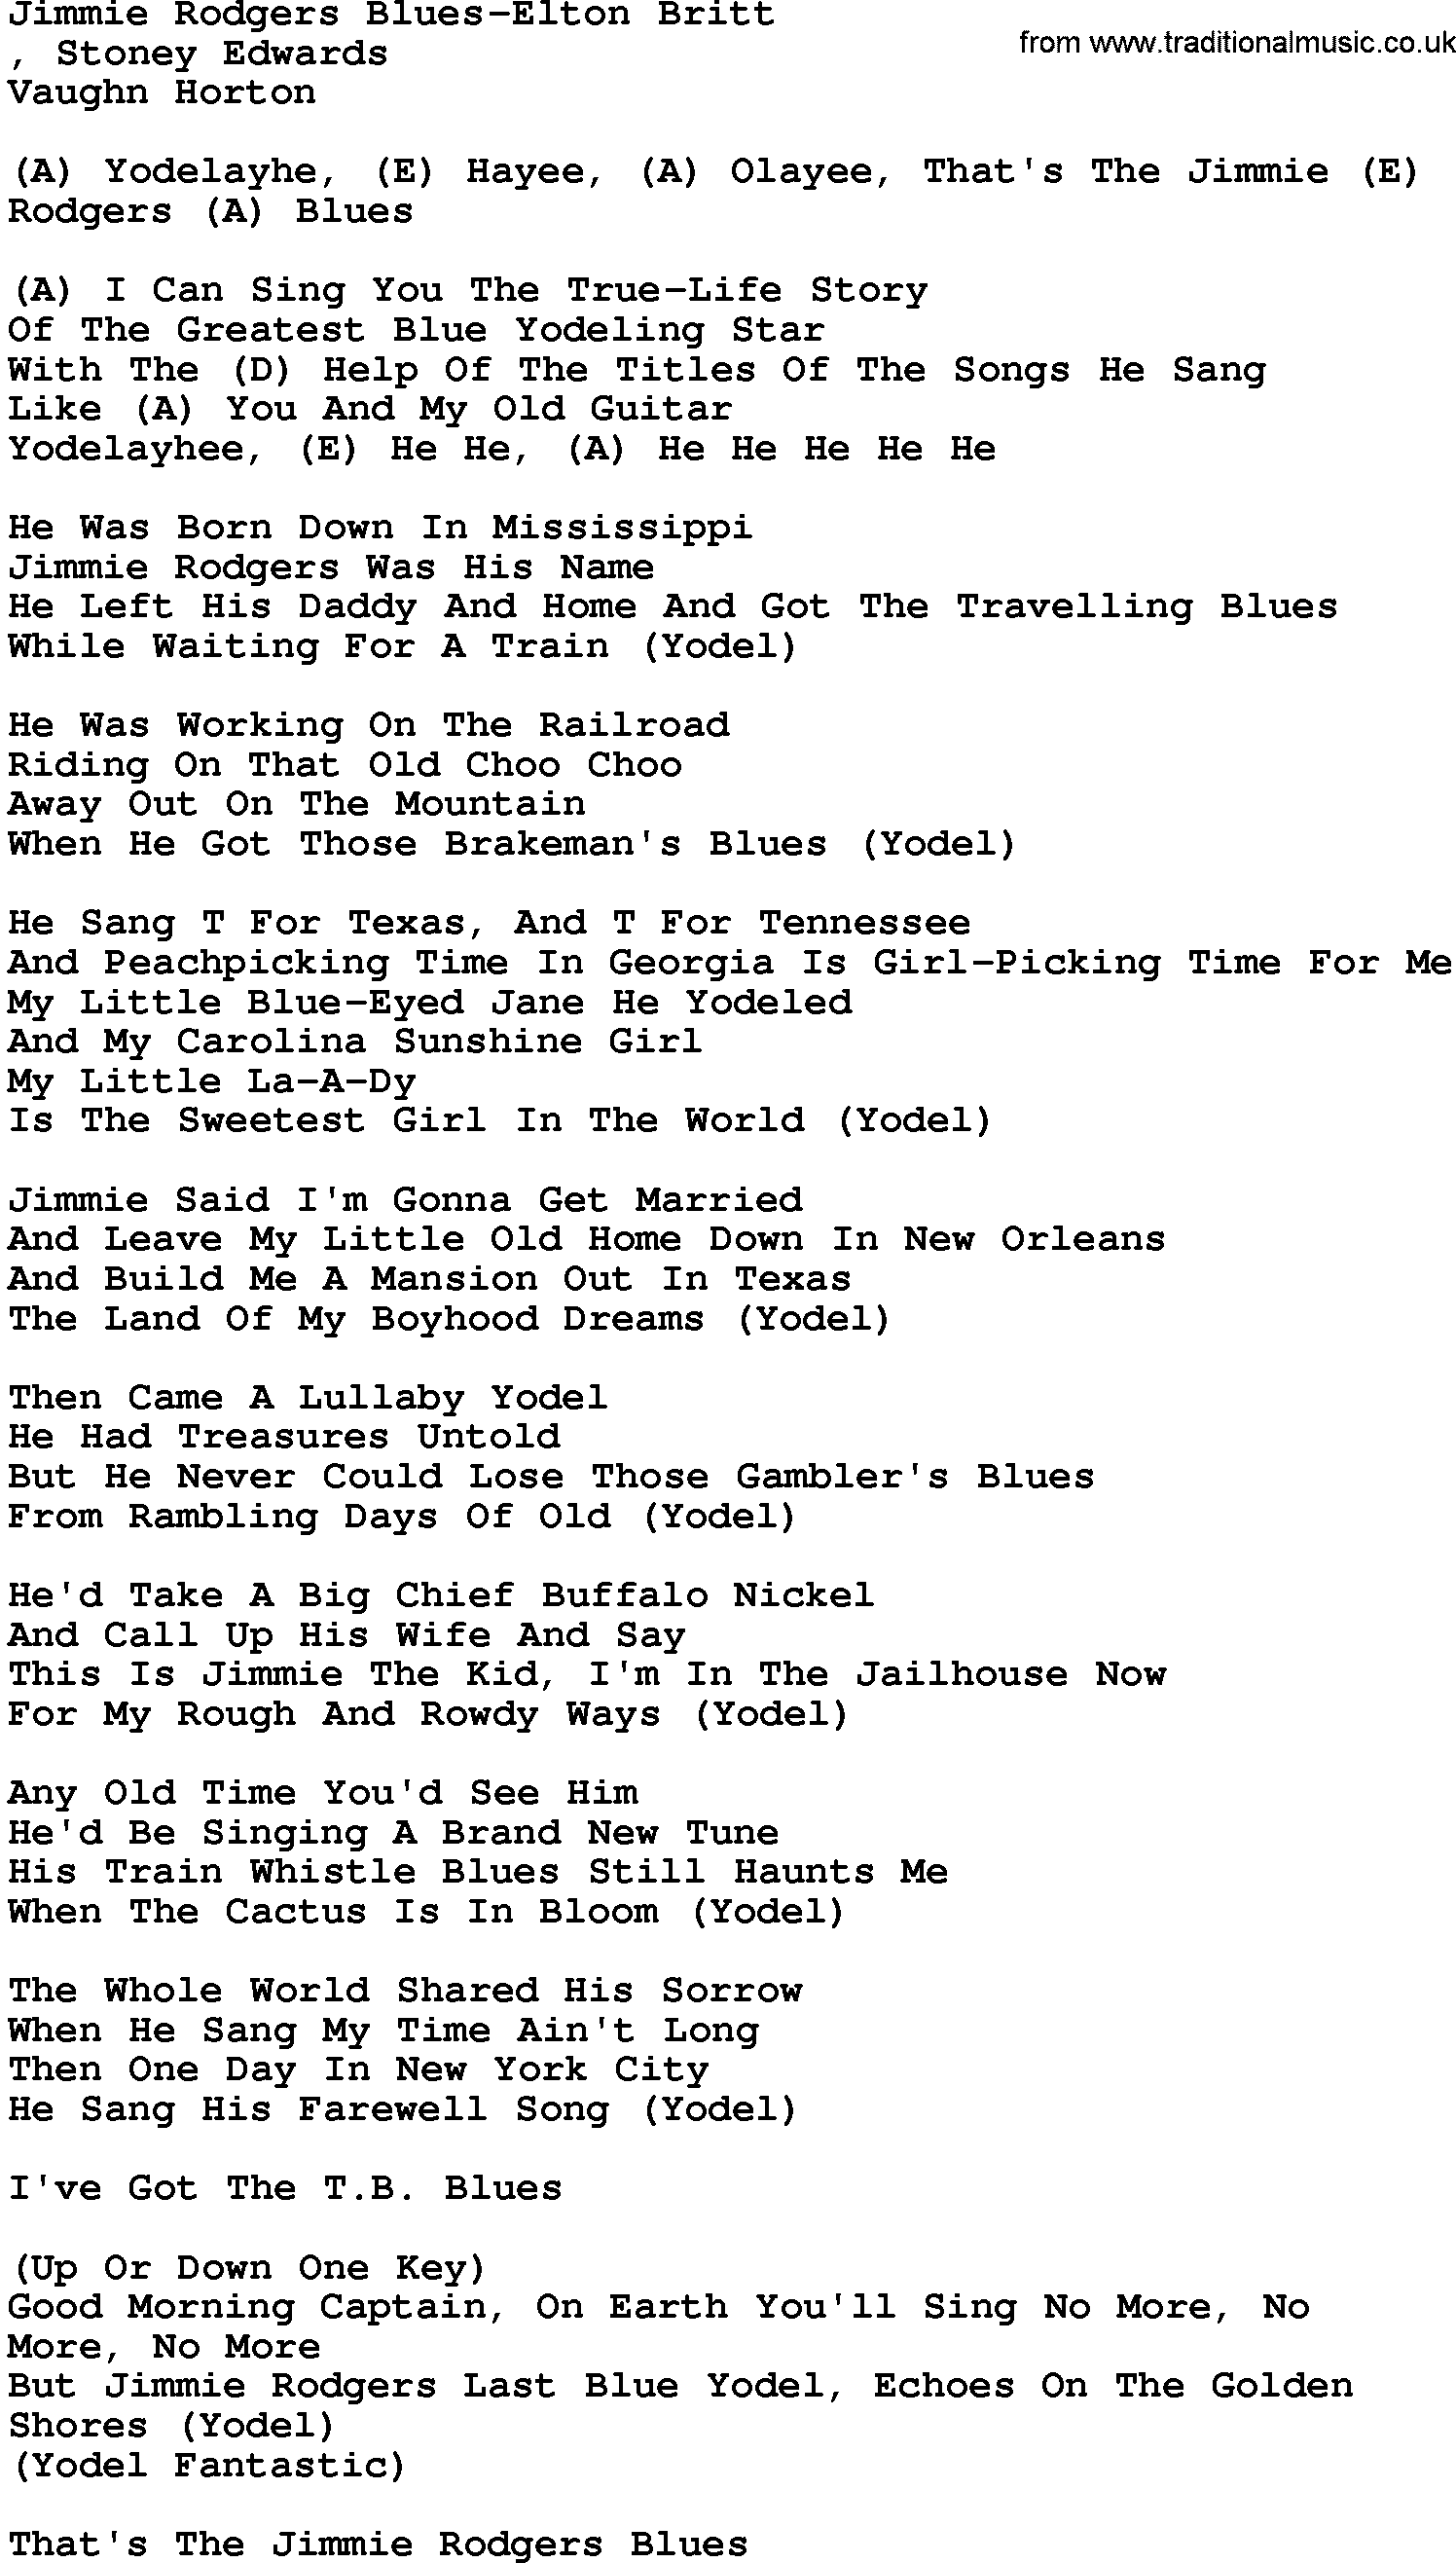 Country music song: Jimmie Rodgers Blues-Elton Britt lyrics and chords